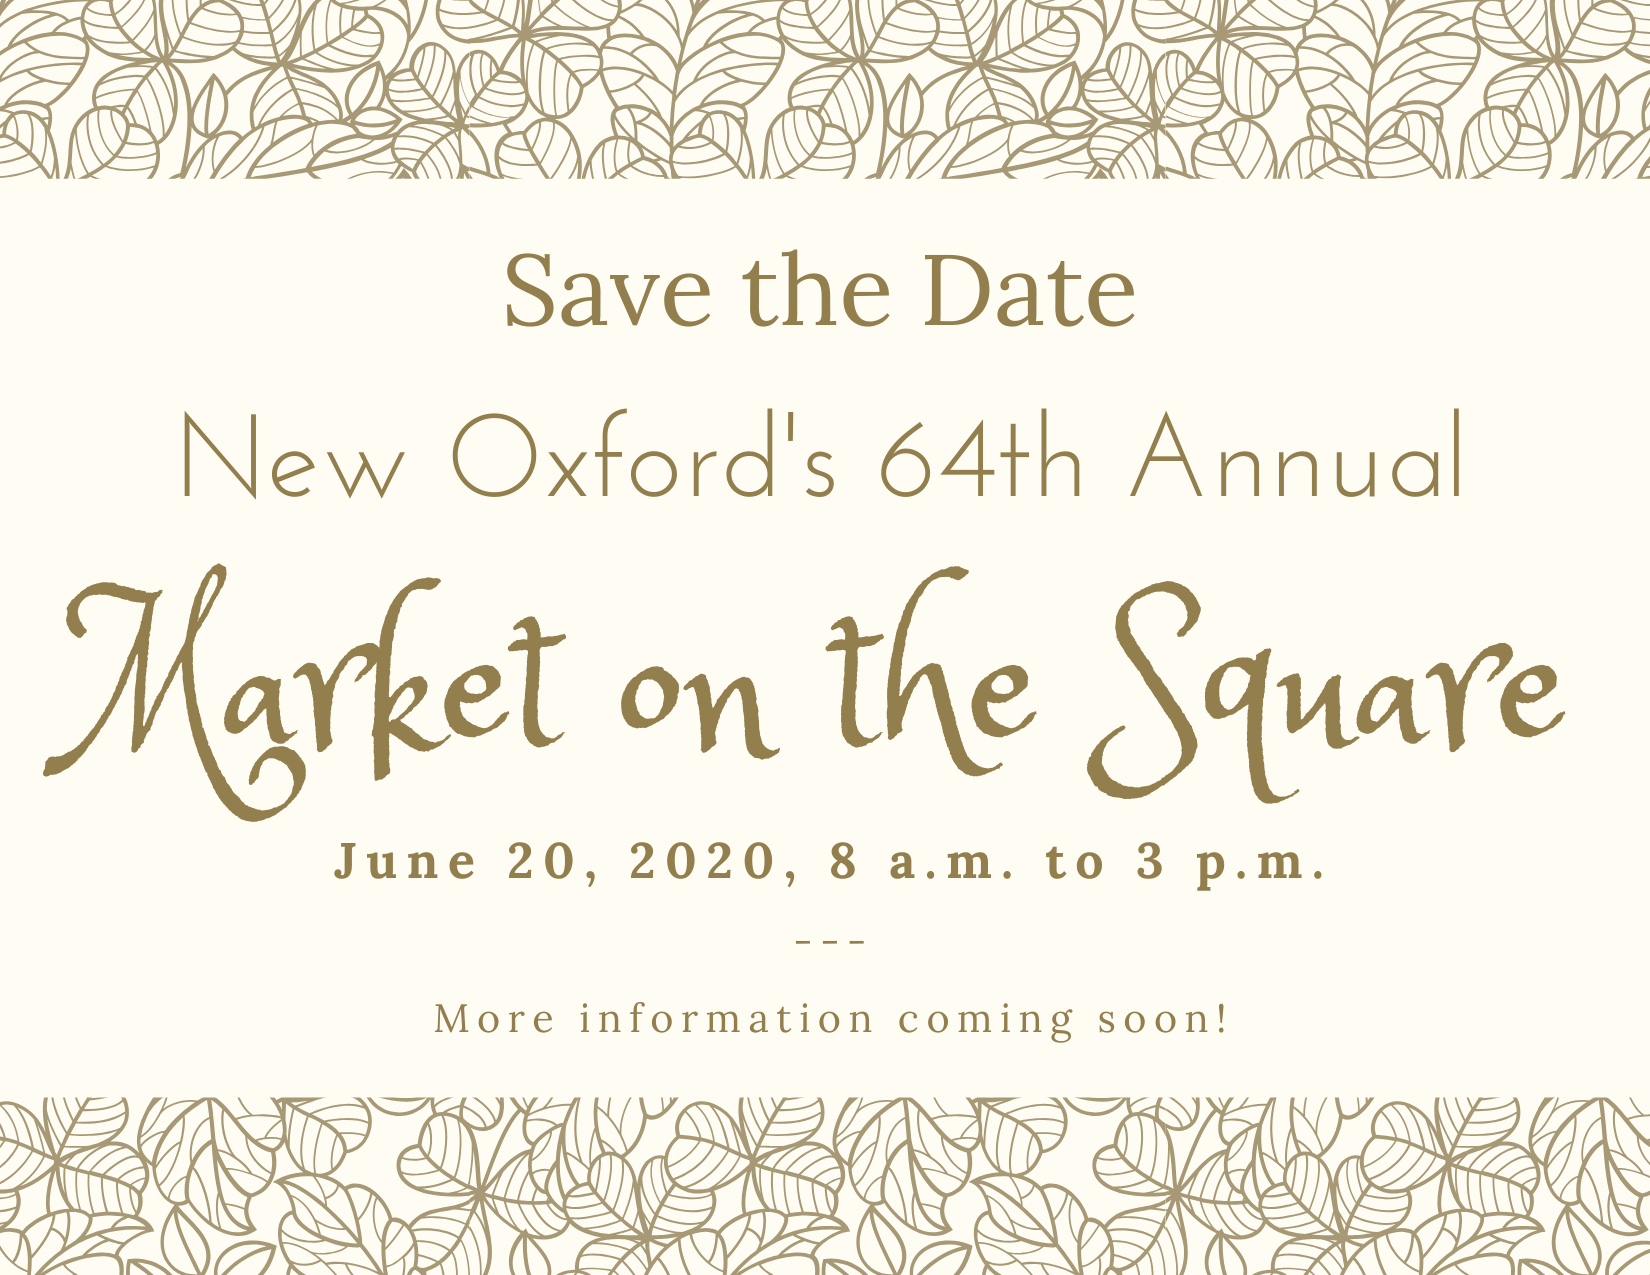 New Oxford’s 64th Annual Market on the Square